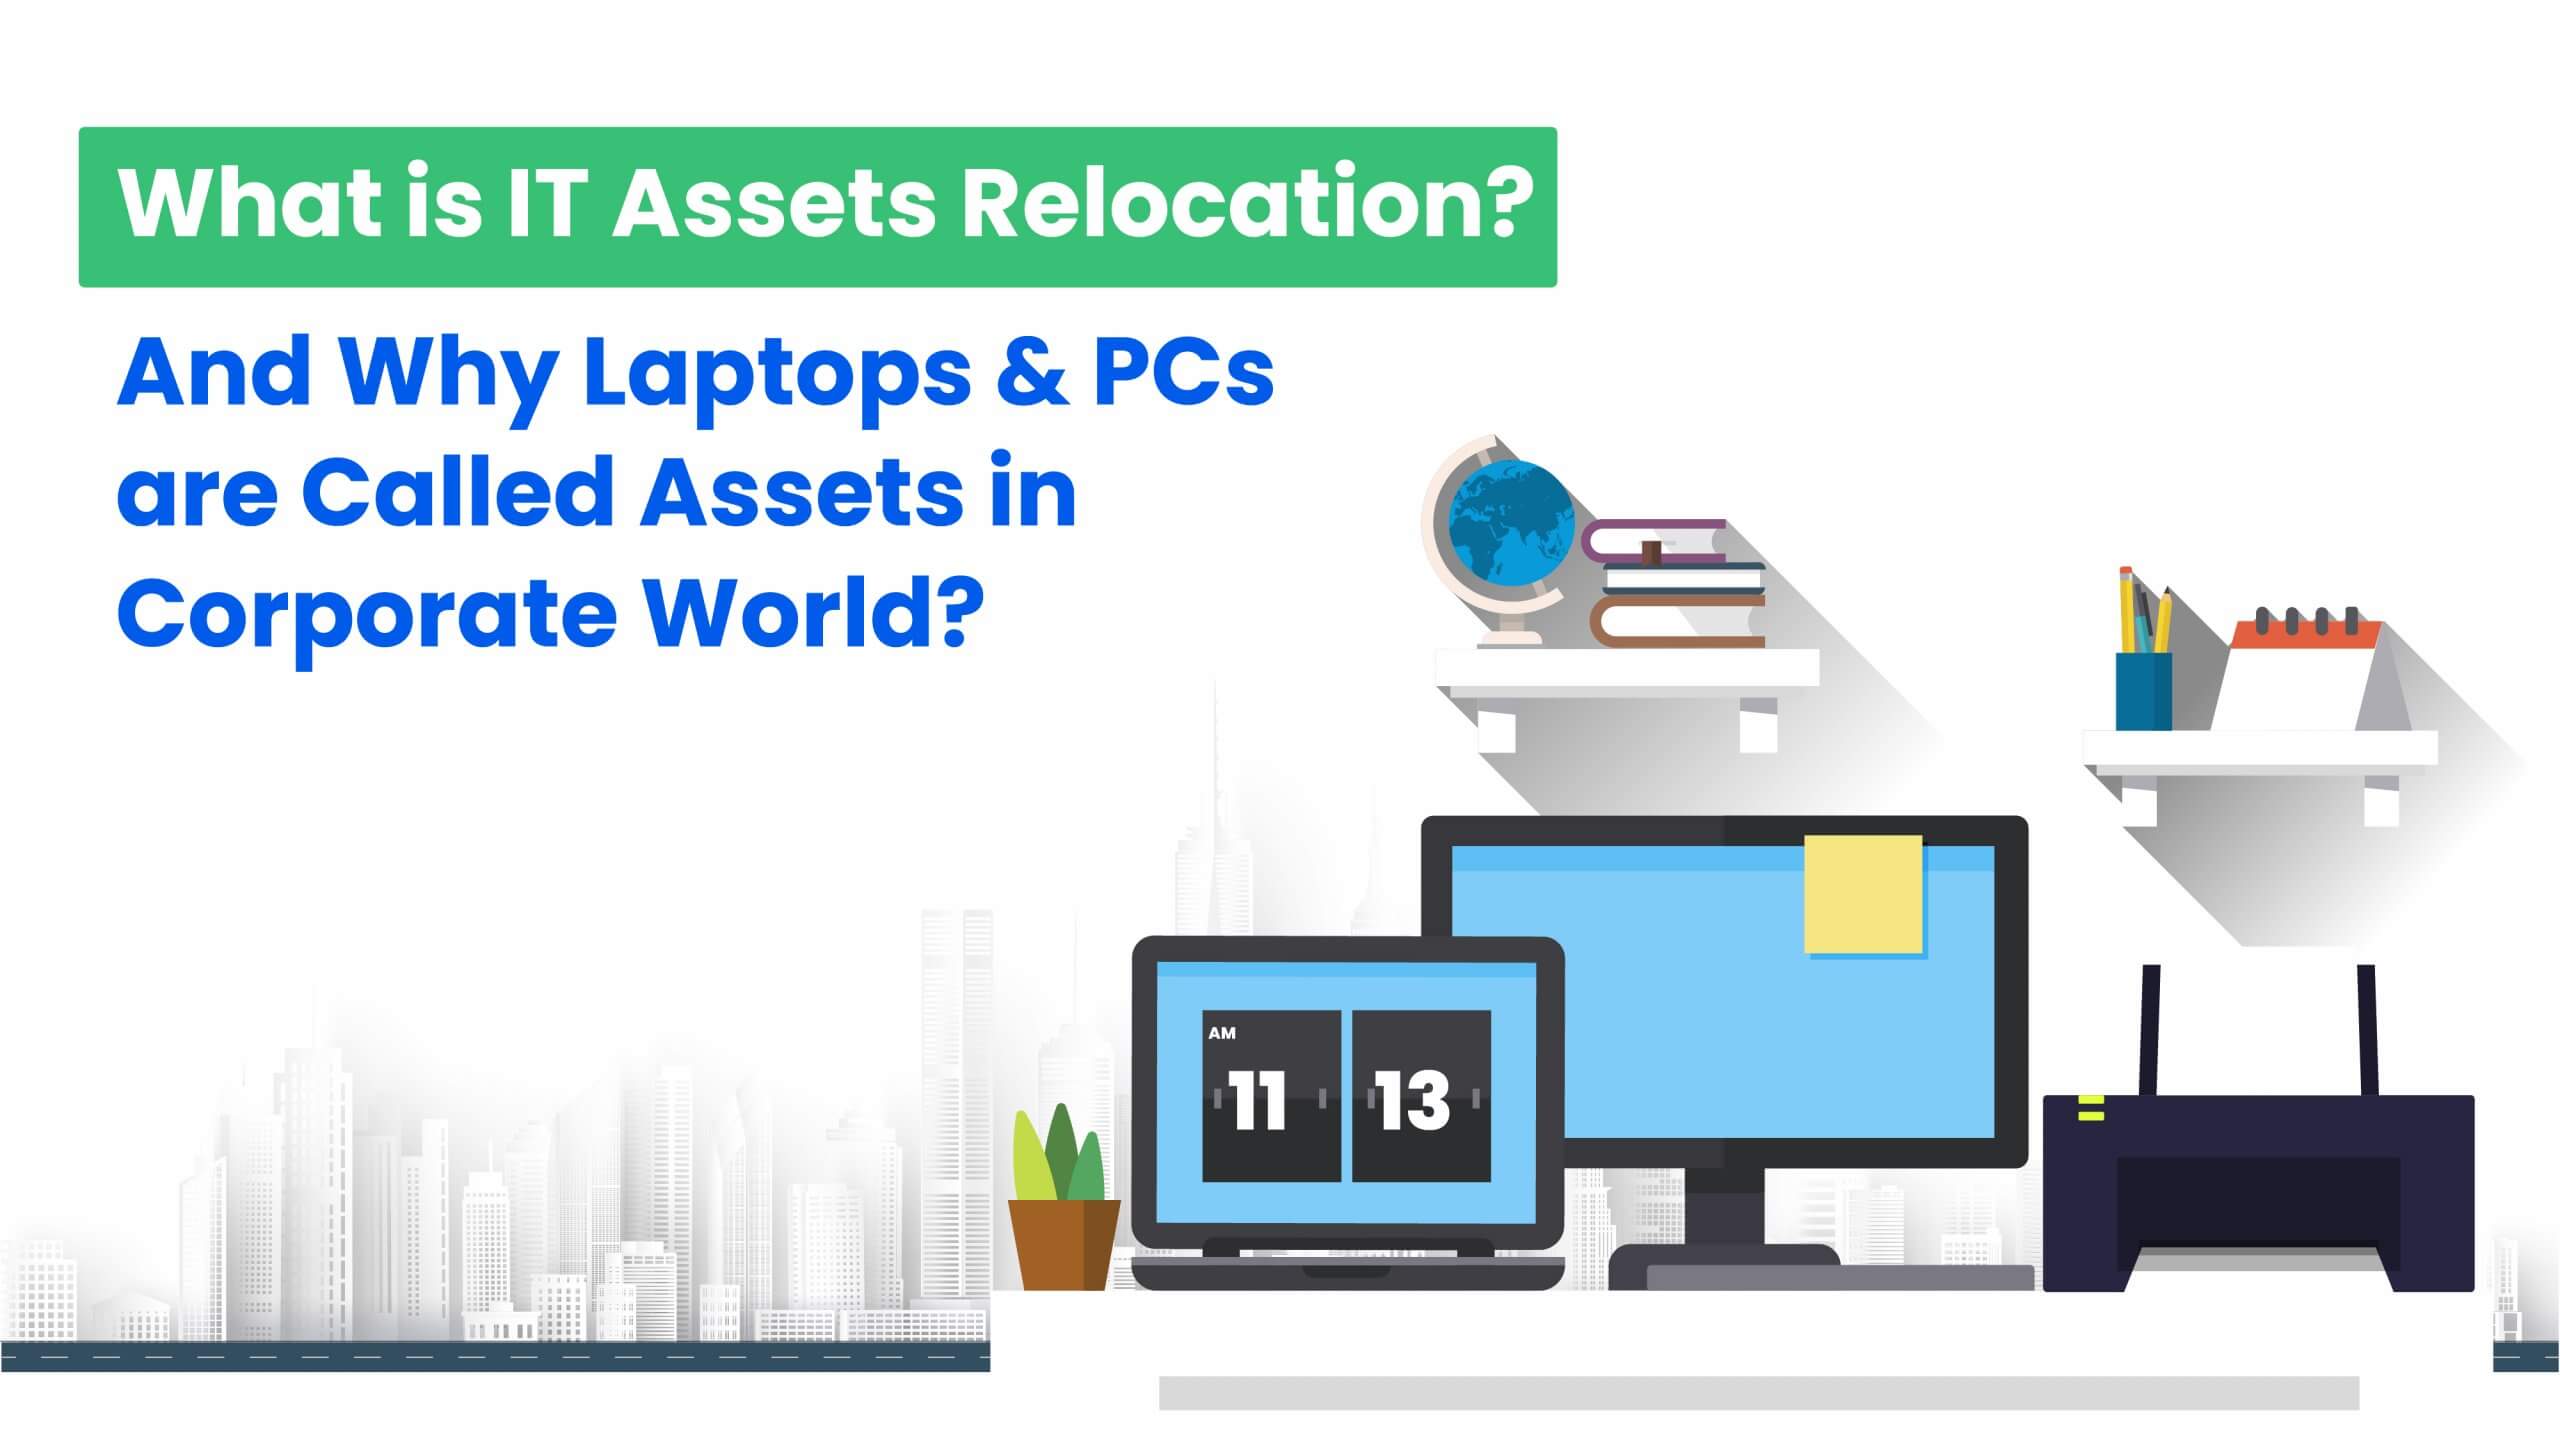 What is IT Assets Relocation. And Why Laptops & PCs are called assets in corporate world